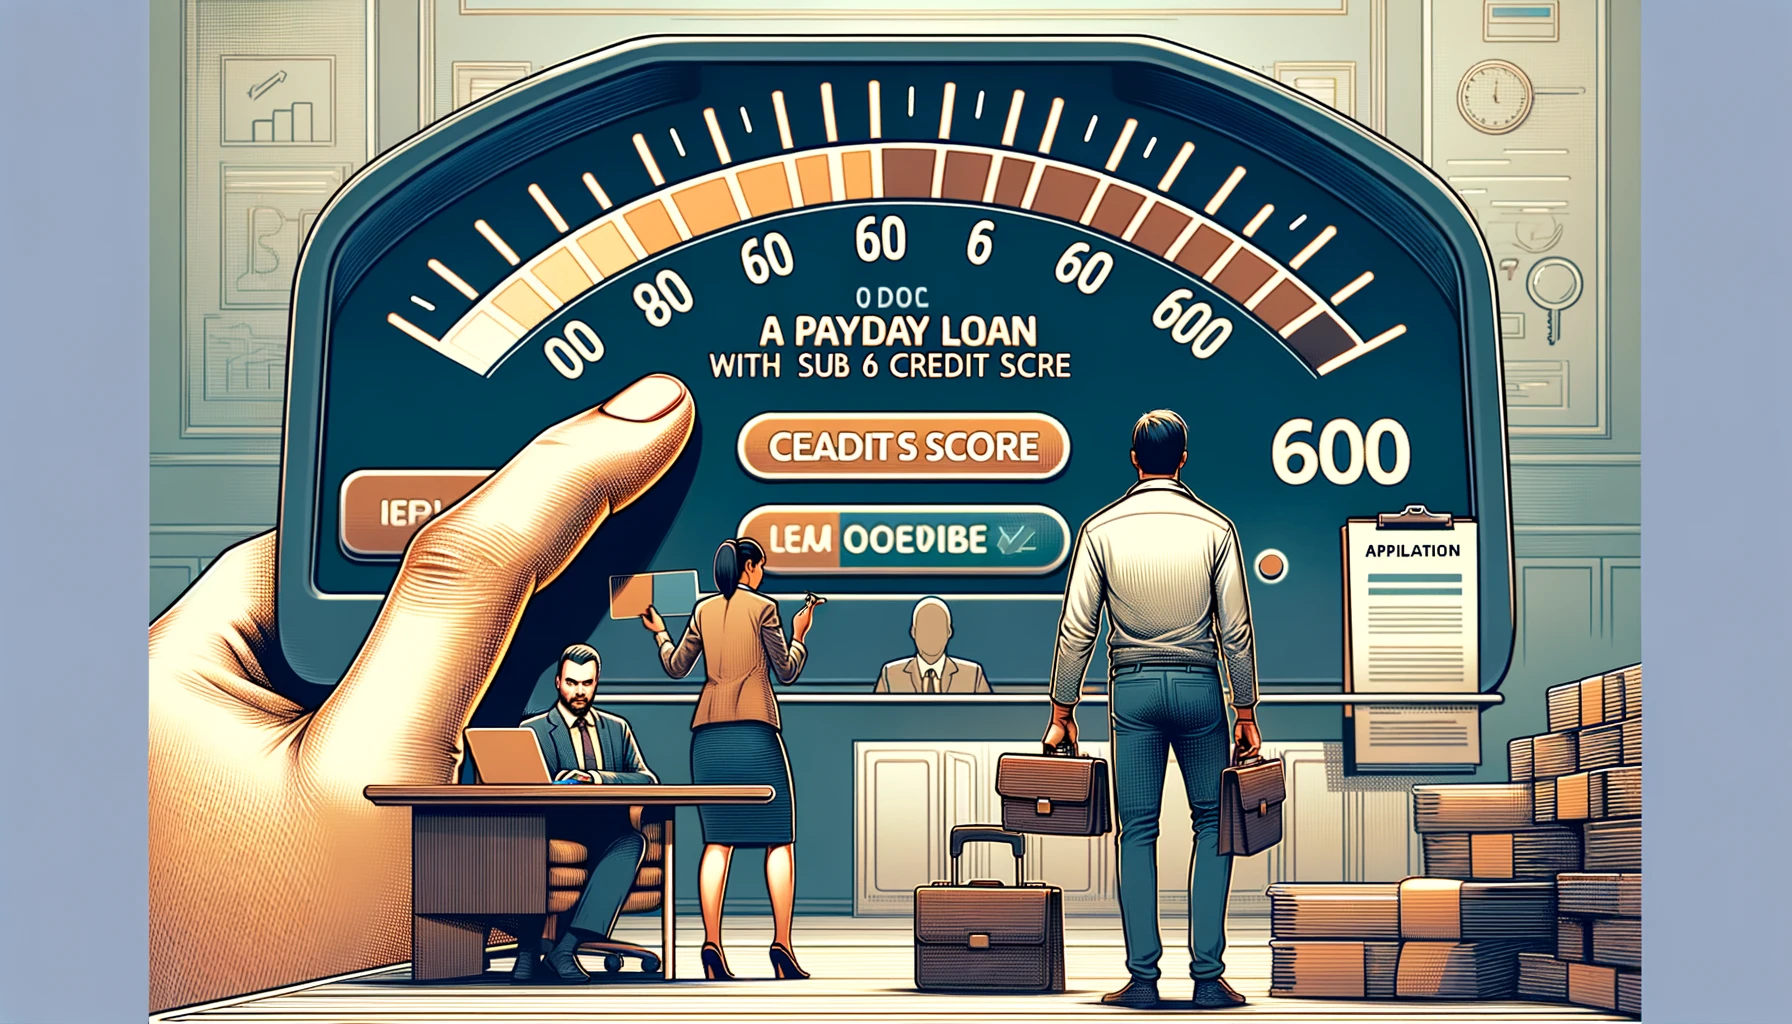 How to Get A PayDay Loan With Sub 600 Credit Score